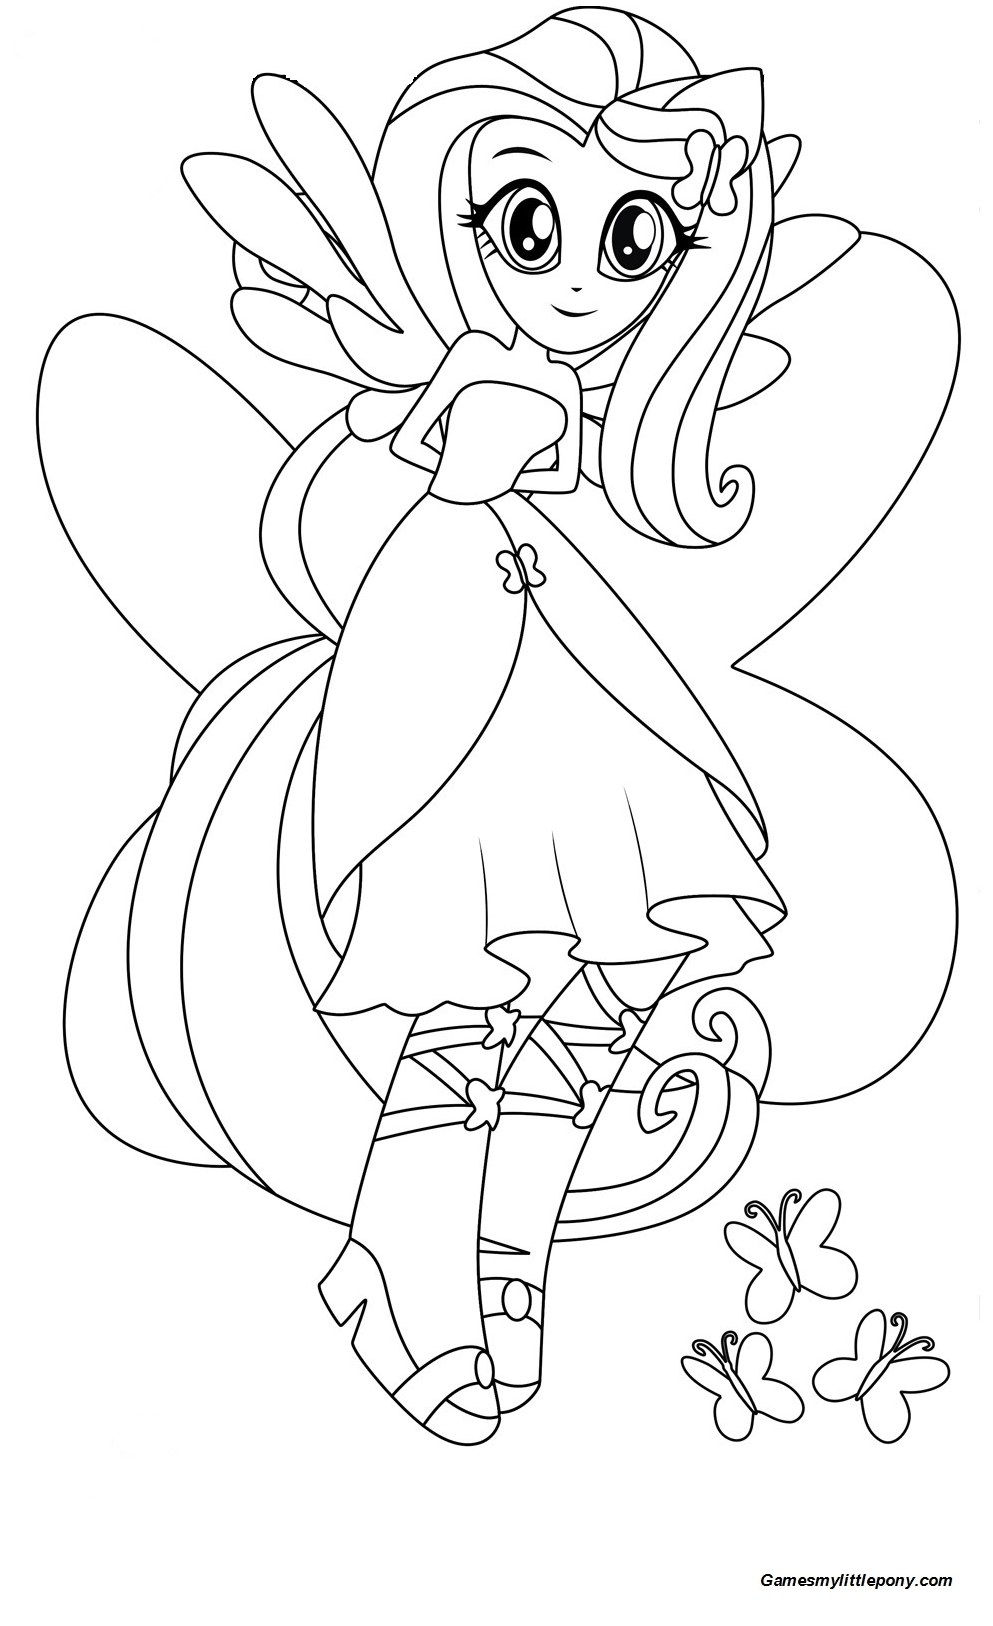 Equestria Girls Fluttershy Coloring Page